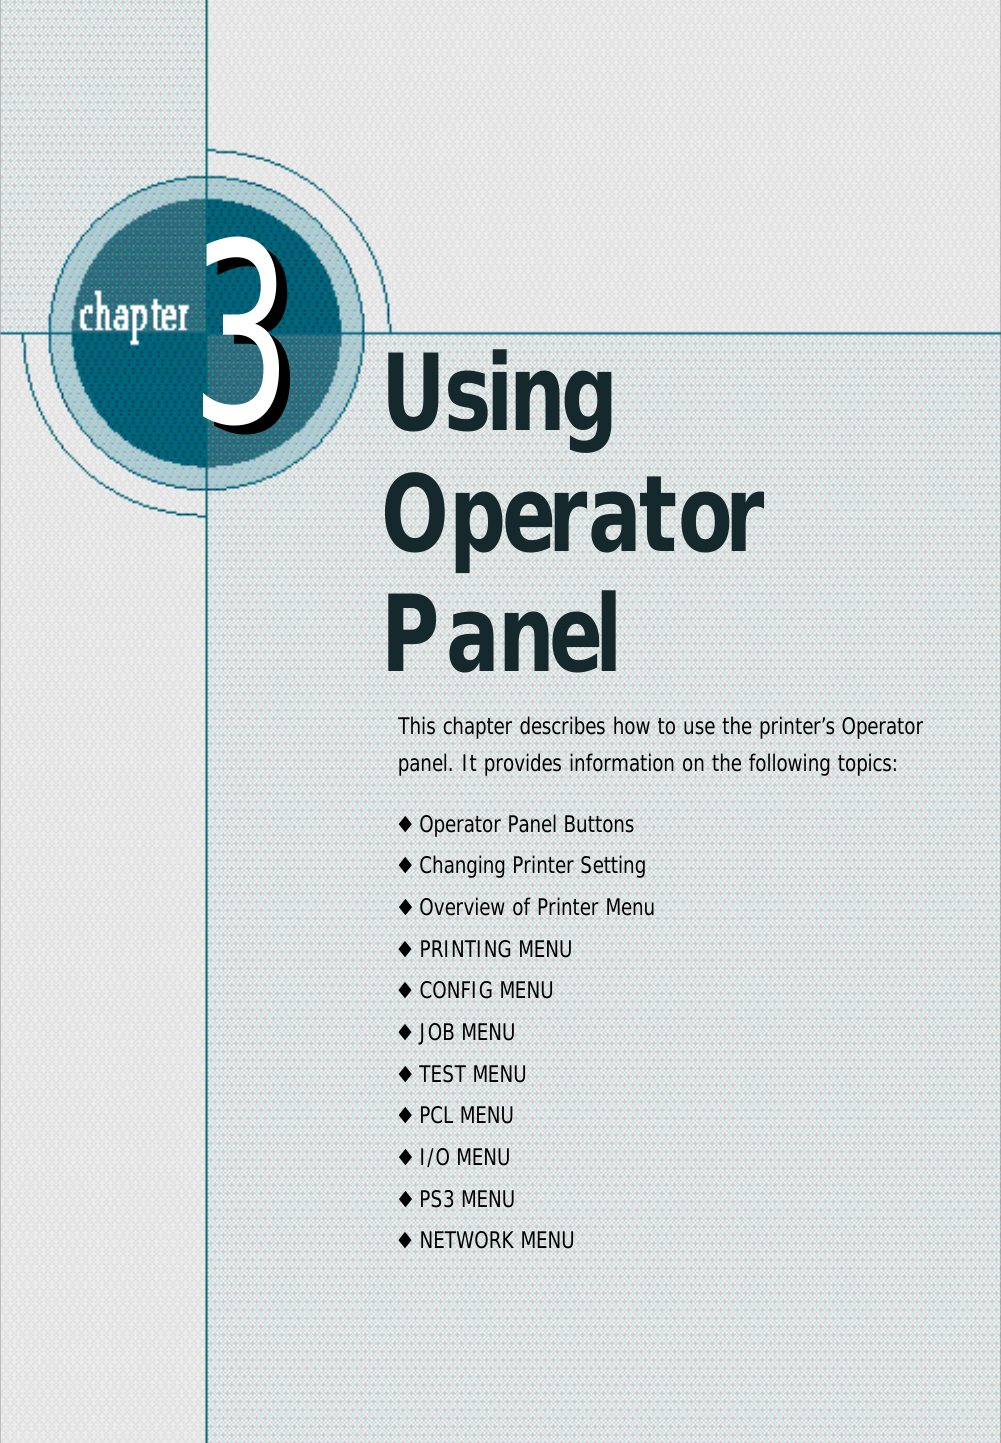 Using OperatorPanelThis chapter describes how to use the printer’s Operatorpanel. It provides information on the following topics:◆Operator Panel Buttons◆Changing Printer Setting◆Overview of Printer Menu◆PRINTING MENU◆CONFIG MENU◆JOB MENU◆TEST MENU◆PCL MENU◆I/O MENU◆PS3 MENU◆NETWORK MENU33